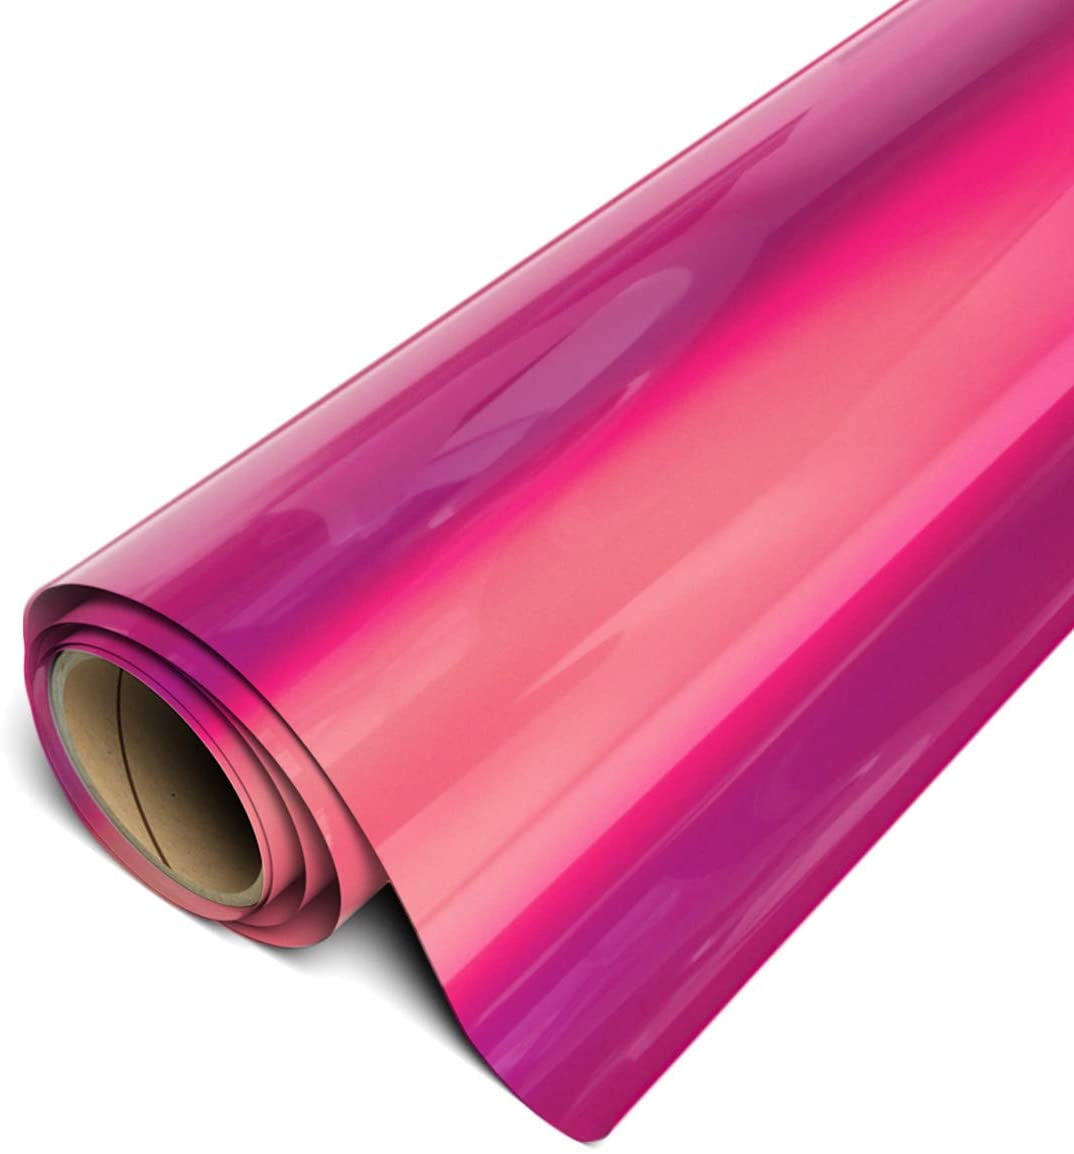  12 x 12ft Heat Transfer Vinyl Rolls, PU (Strong Stretchy) HTV  Vinyl Neon Pink for Shirts, Sooez Iron on Vinyl for All Cutter Machine,  Easy to Cut & Weed for DIY